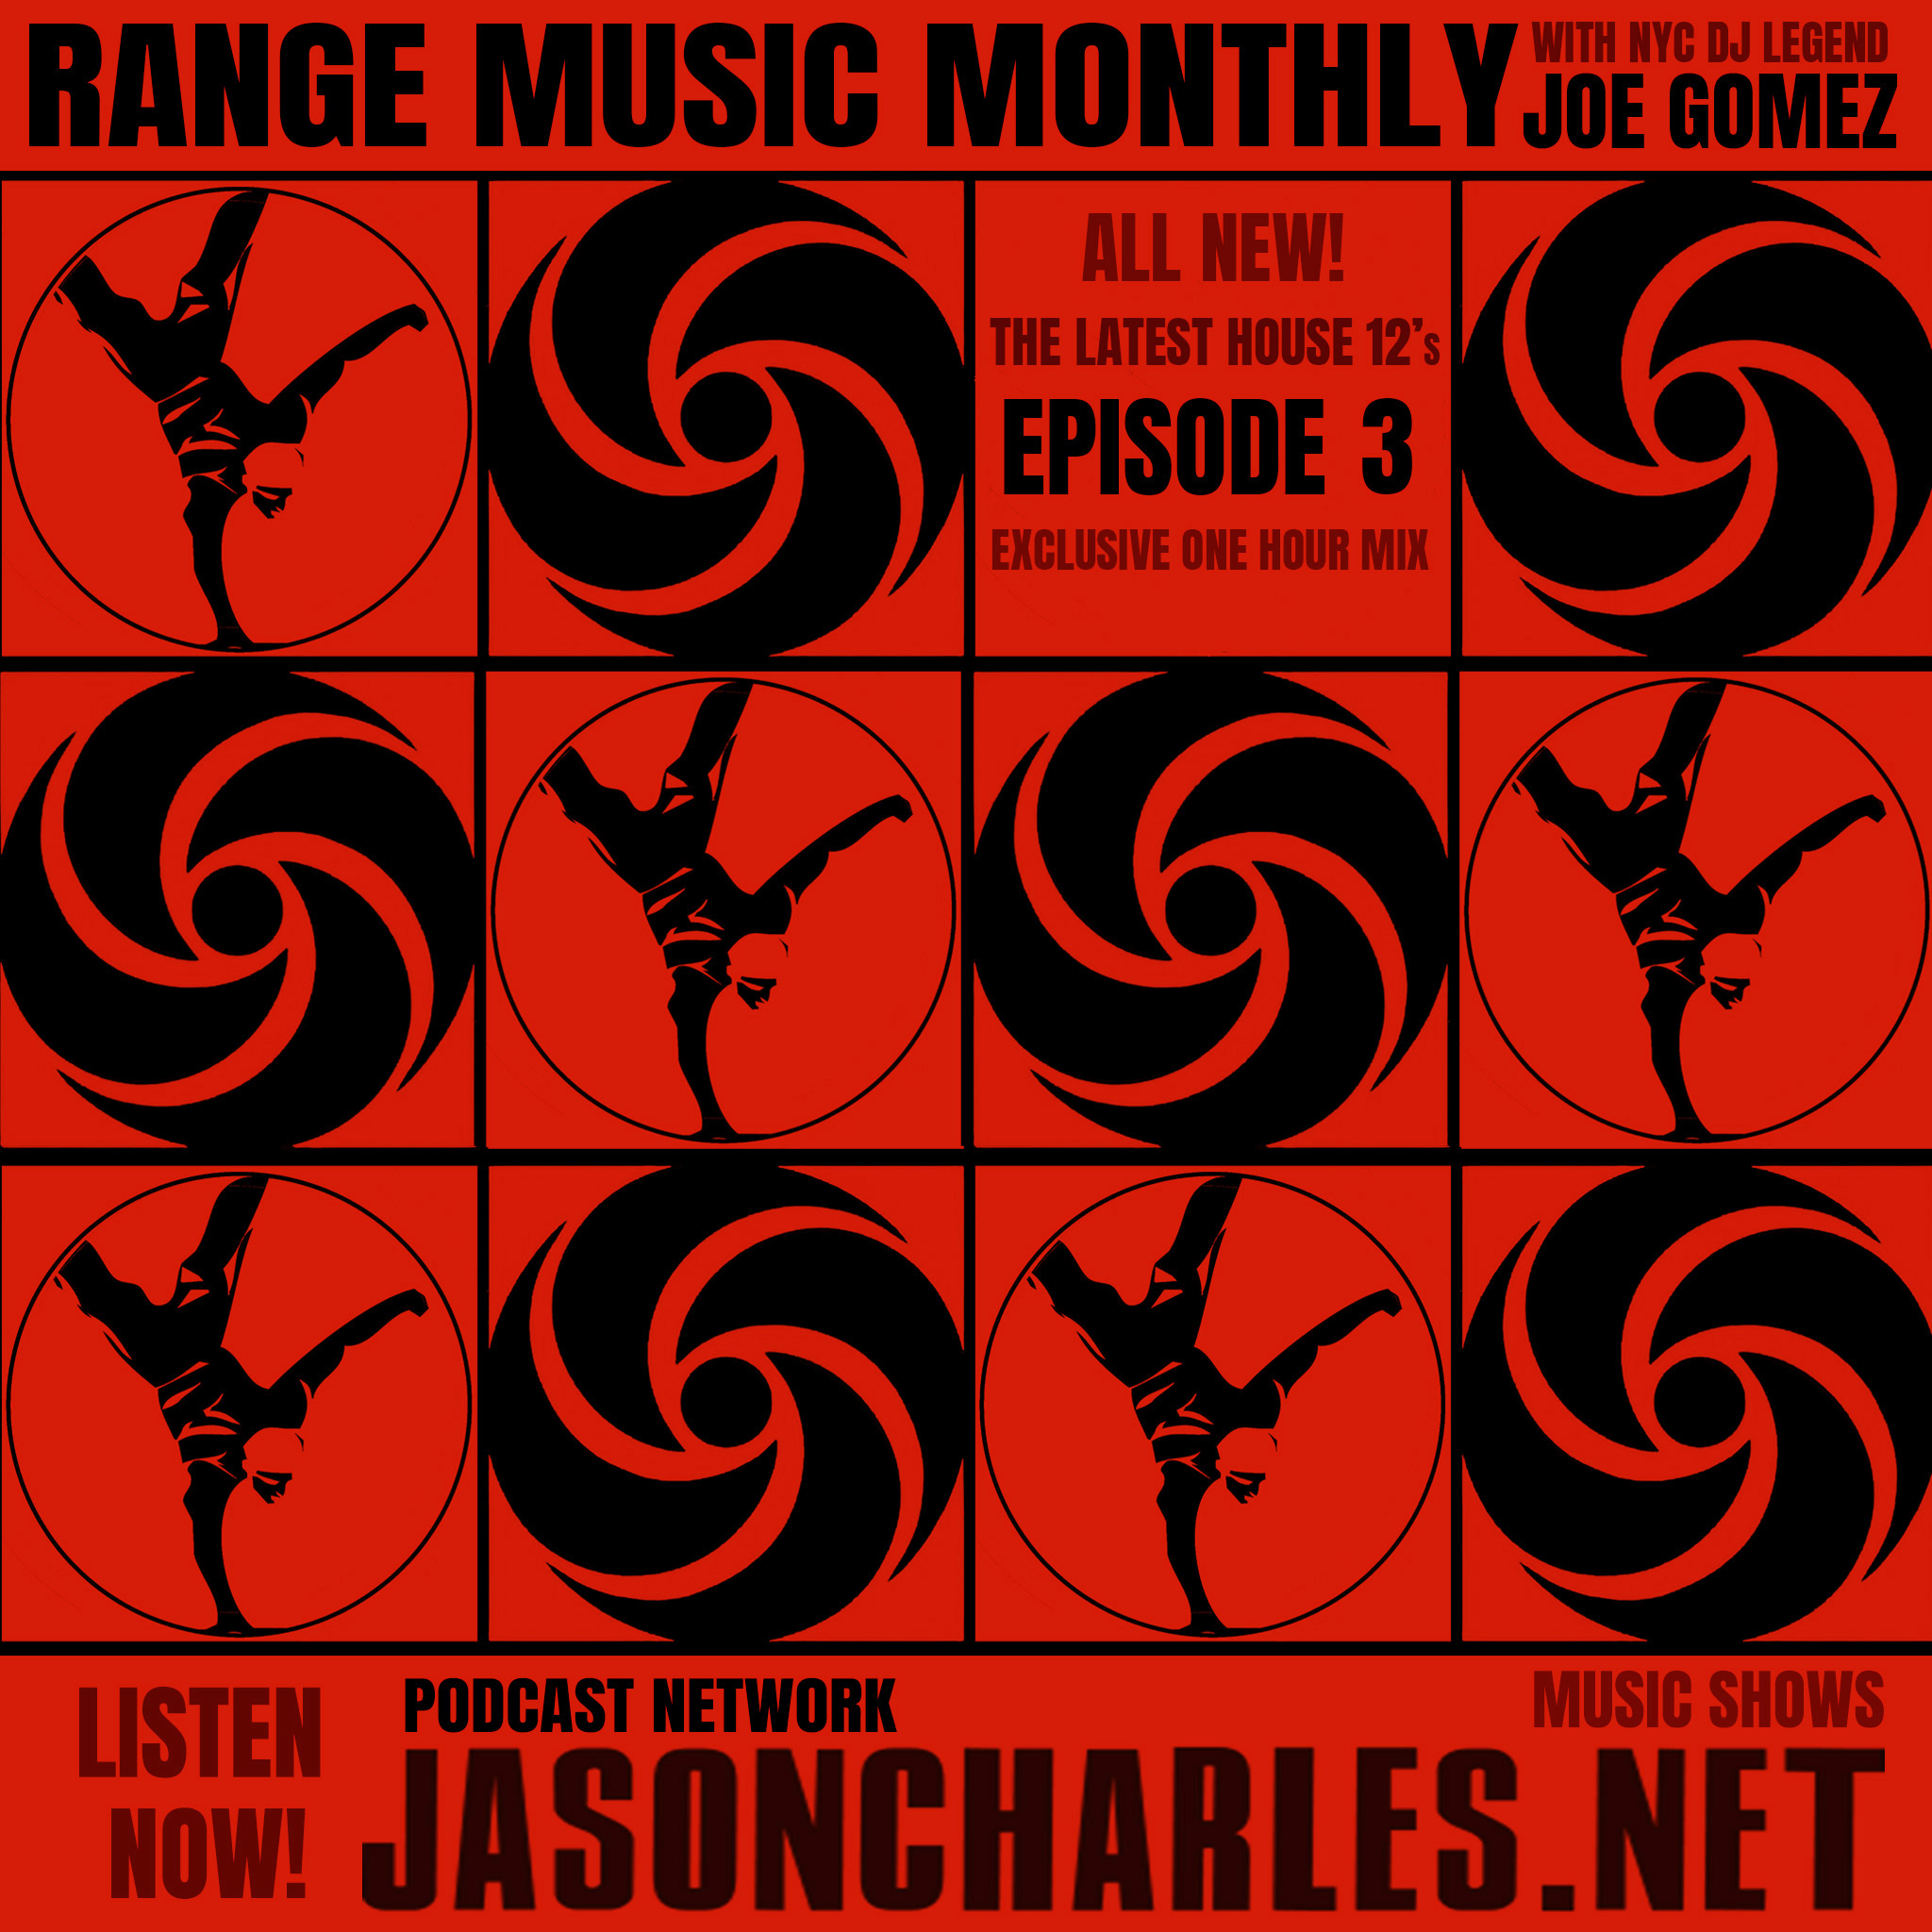 RANGE MUSIC MONTHLY with DJ Joe Gomez Episode 2 The Hottest House 12"s for Fall 2020